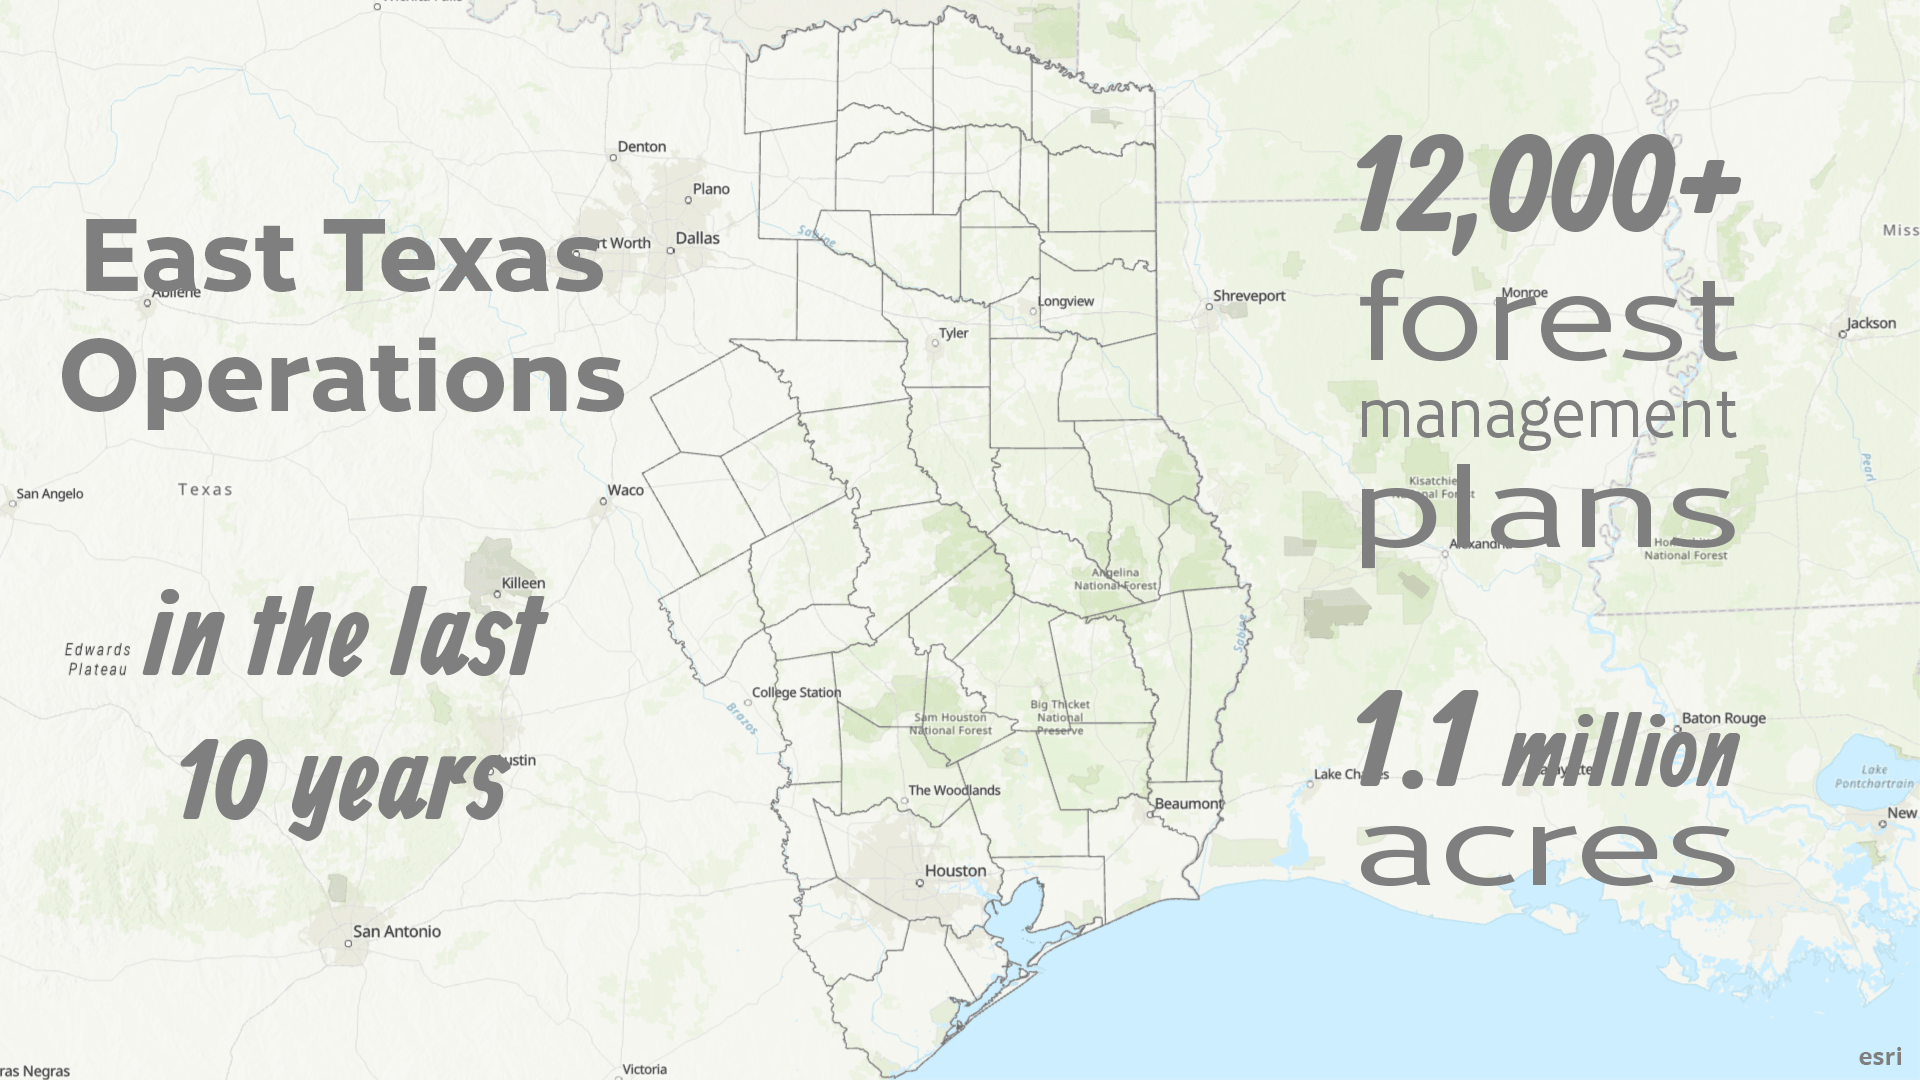 East Texas Management Plans, 2010-2019 with text